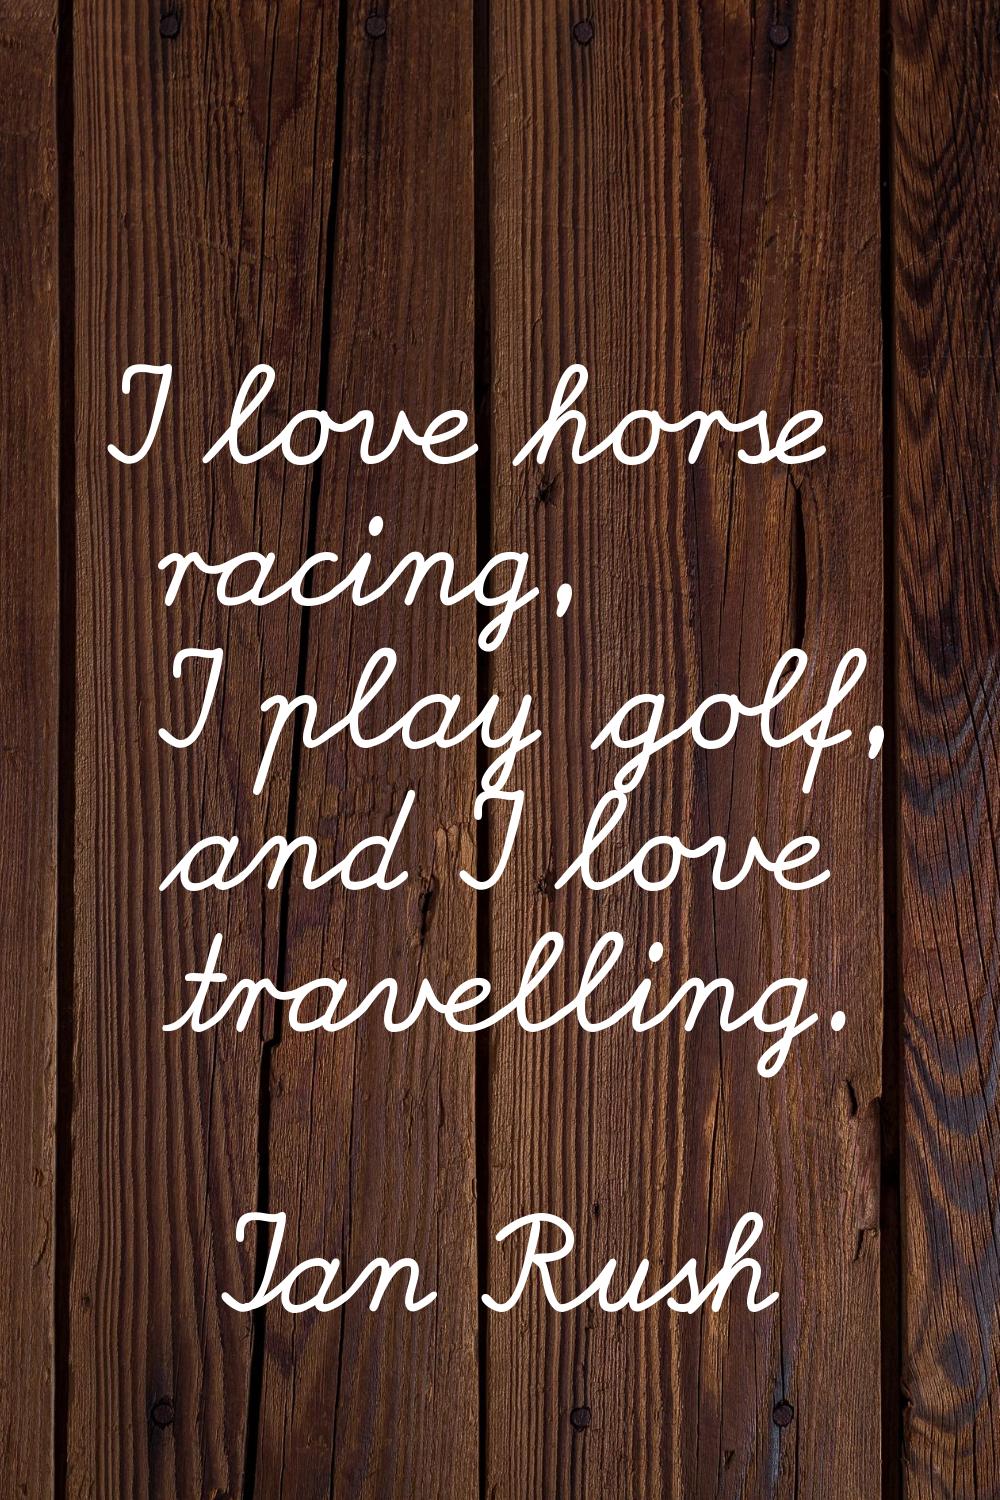 I love horse racing, I play golf, and I love travelling.